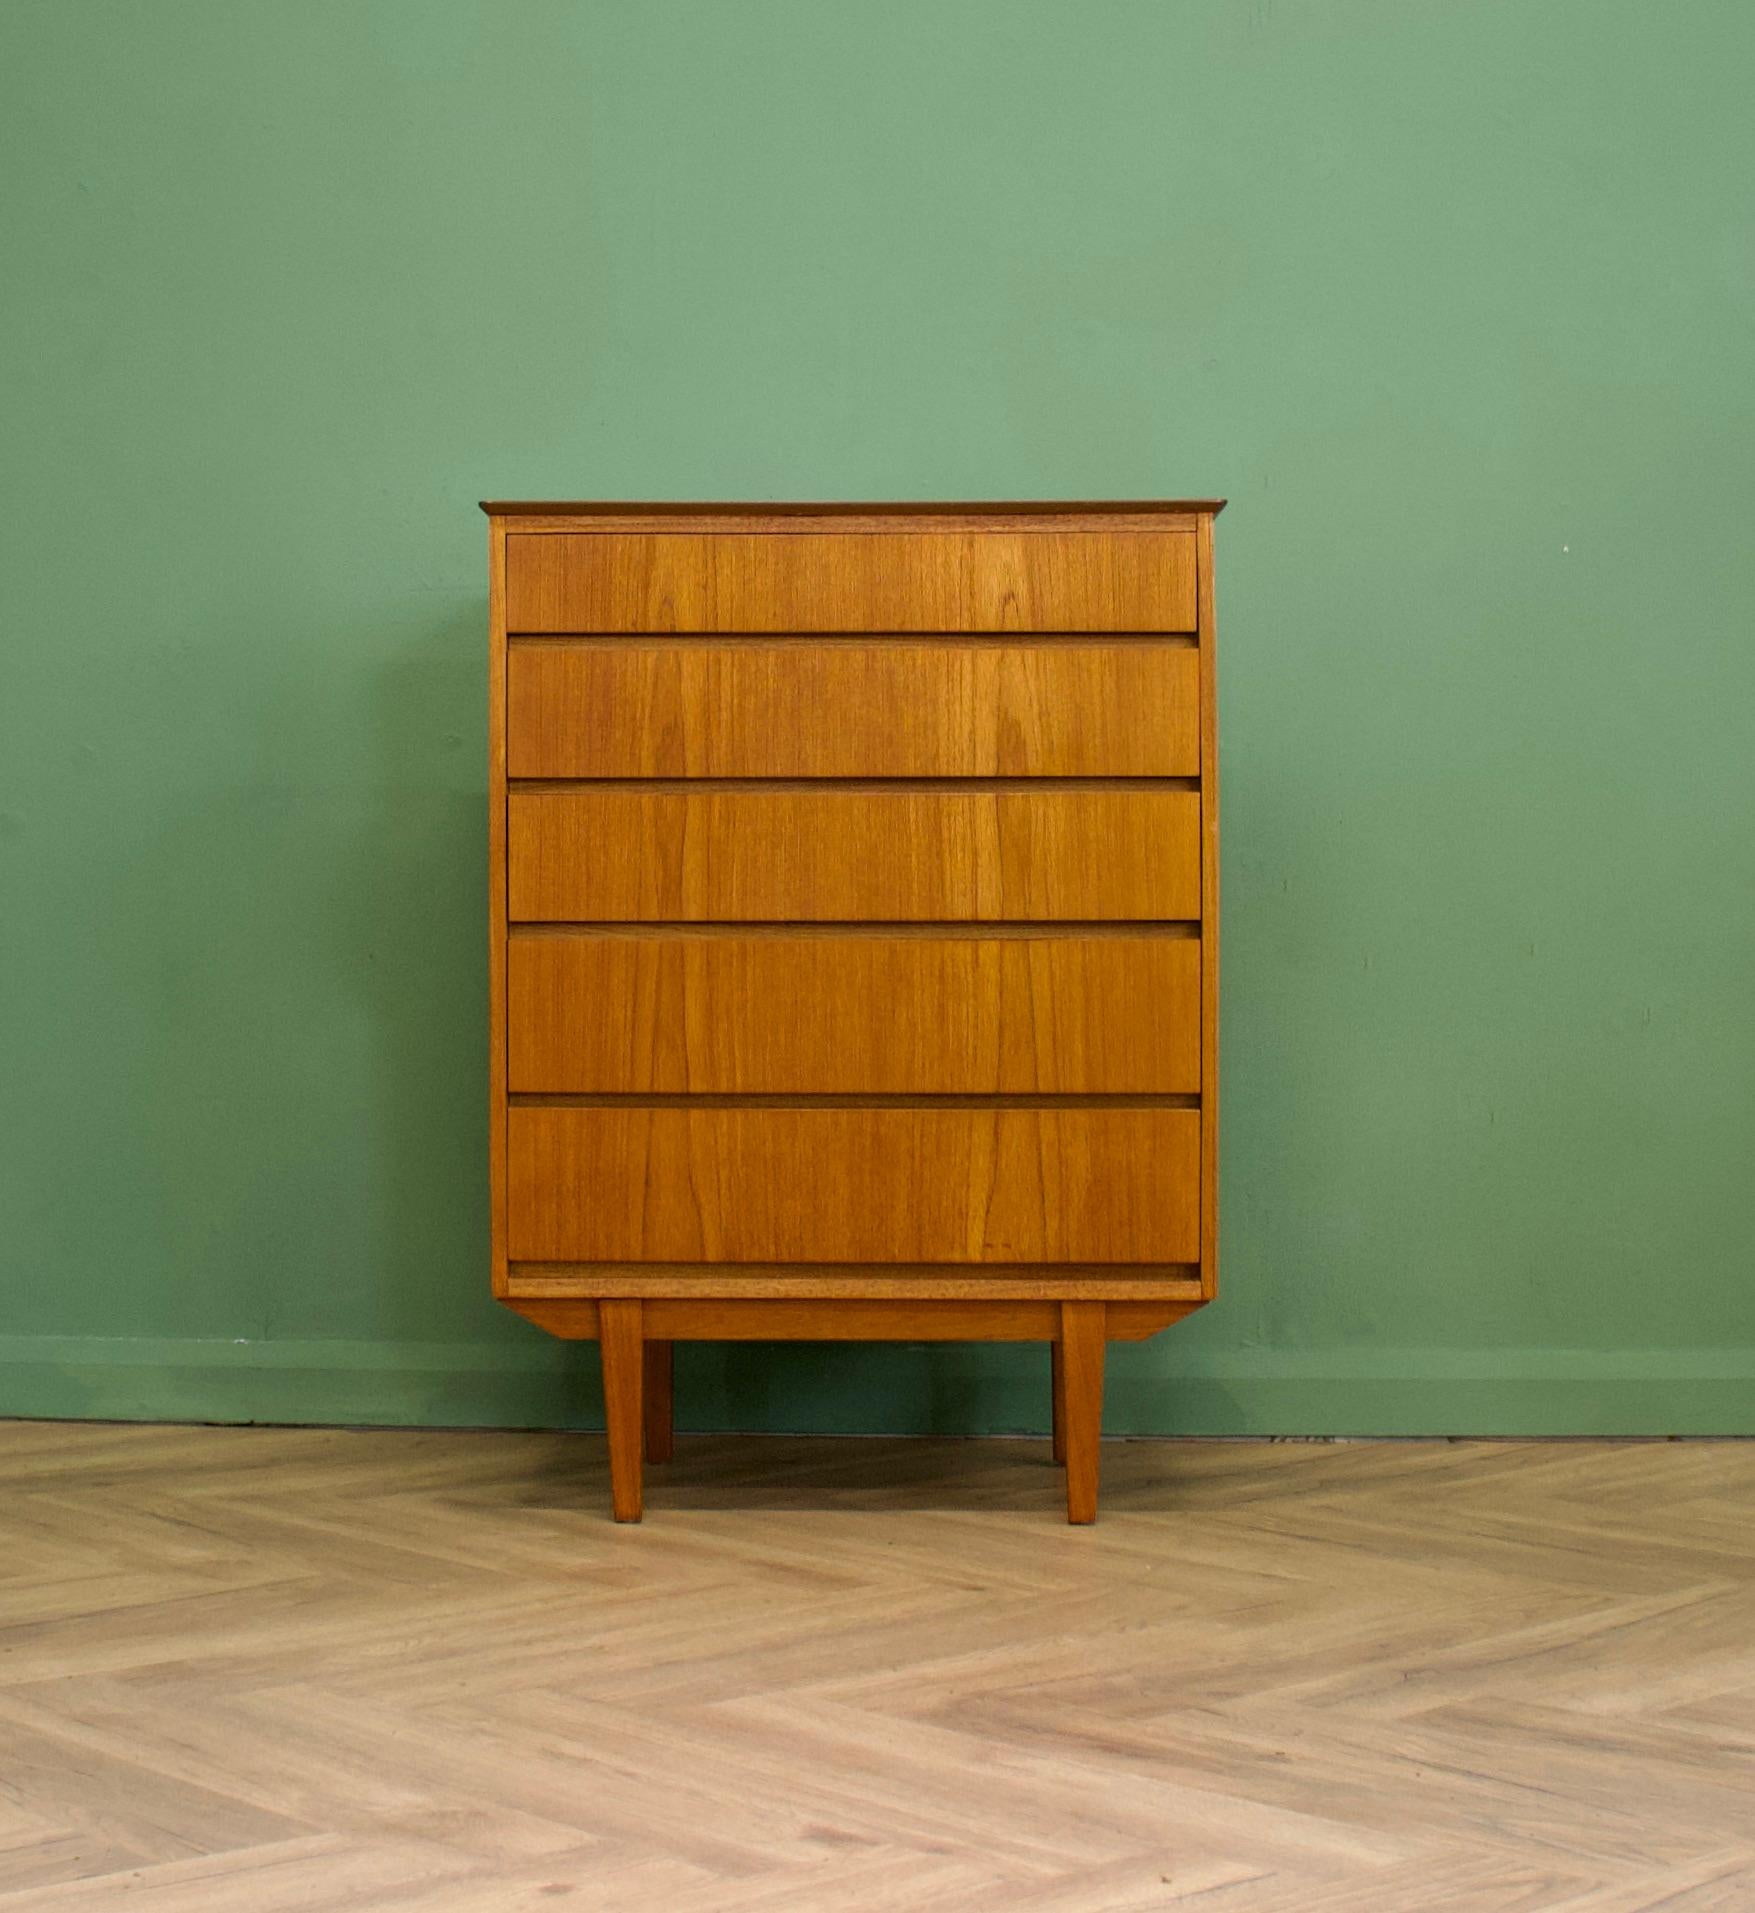 A mid century teak tallboy chest of drawers in the Danish style - circa 1960s
Standing on slightly tapered legs
The piece has a sleek modern look, with its handless drawers